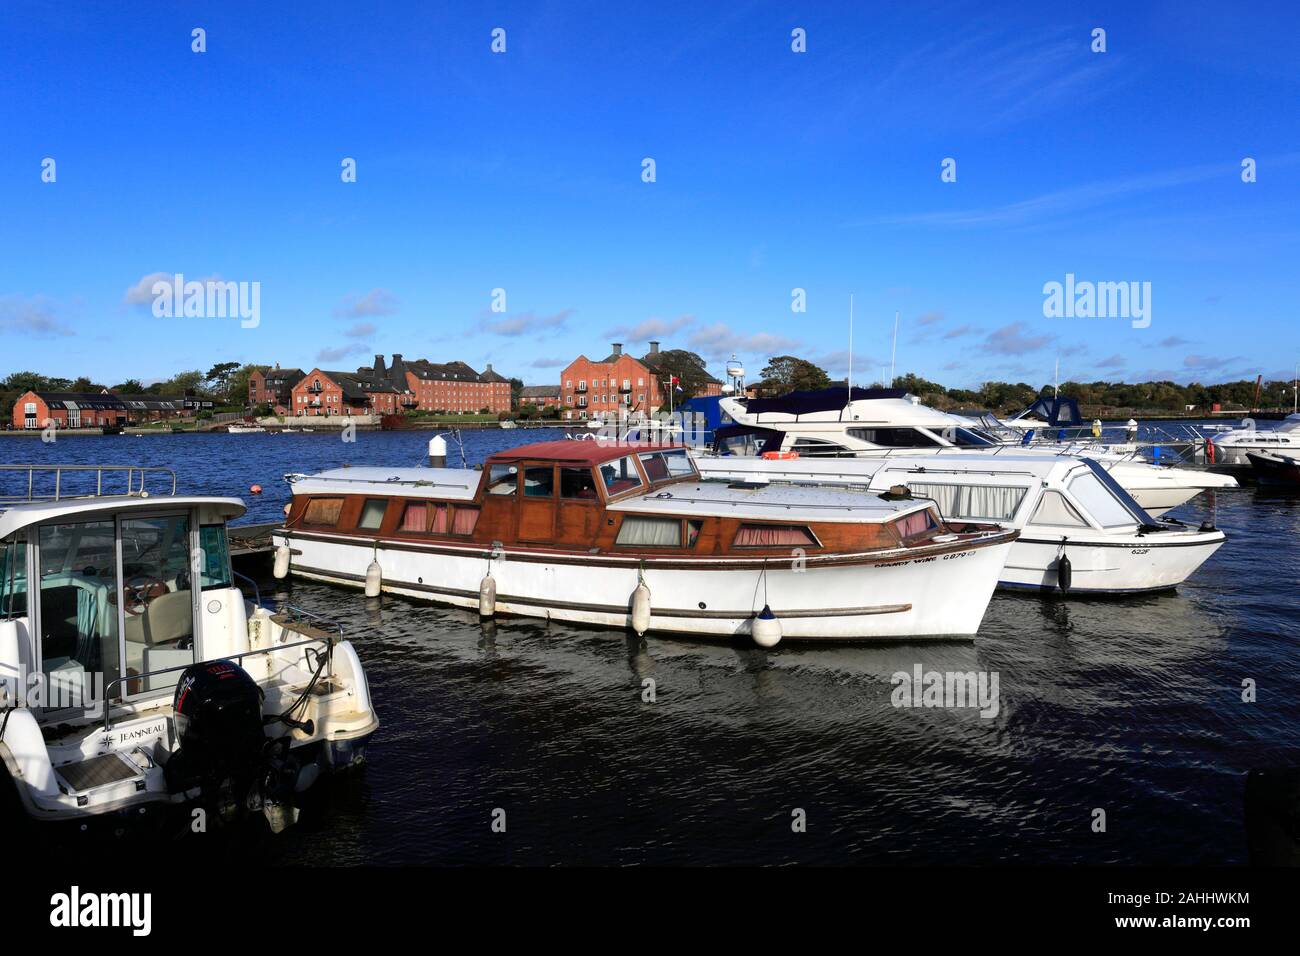 Summer view over Oulton Broad, Lowestoft town, Suffolk county, England Stock Photo